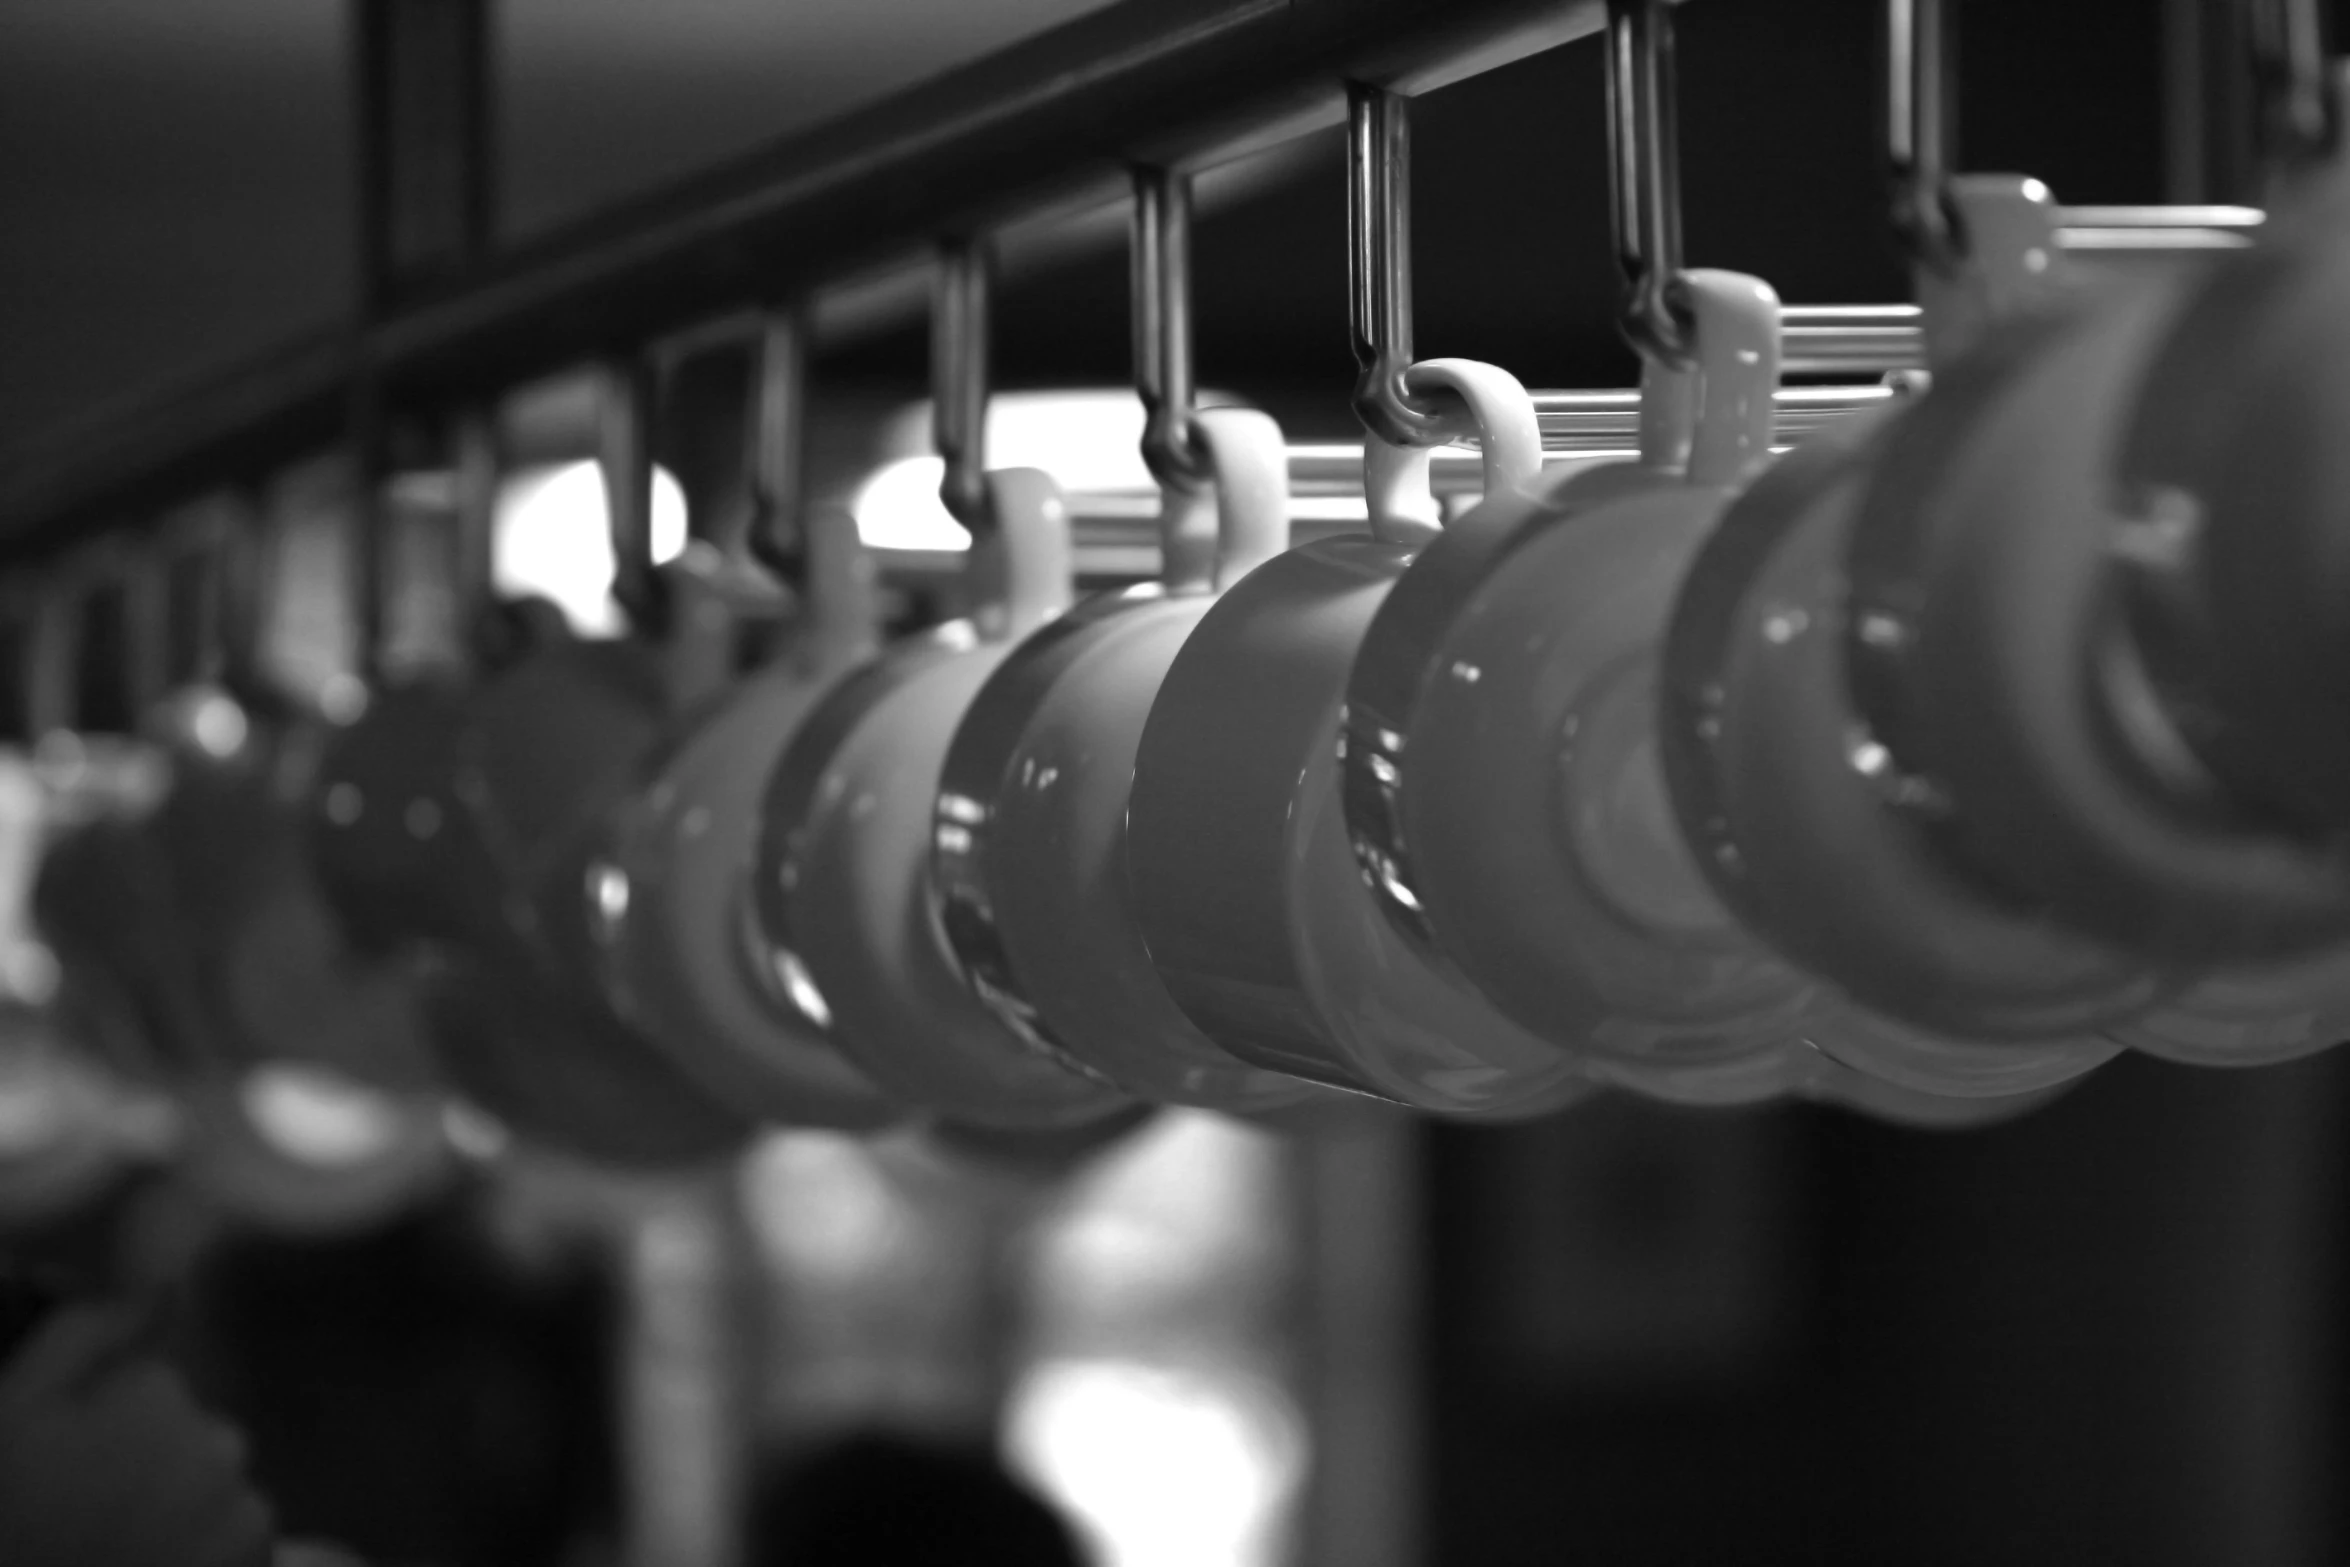 some water cups are hanging on the bar